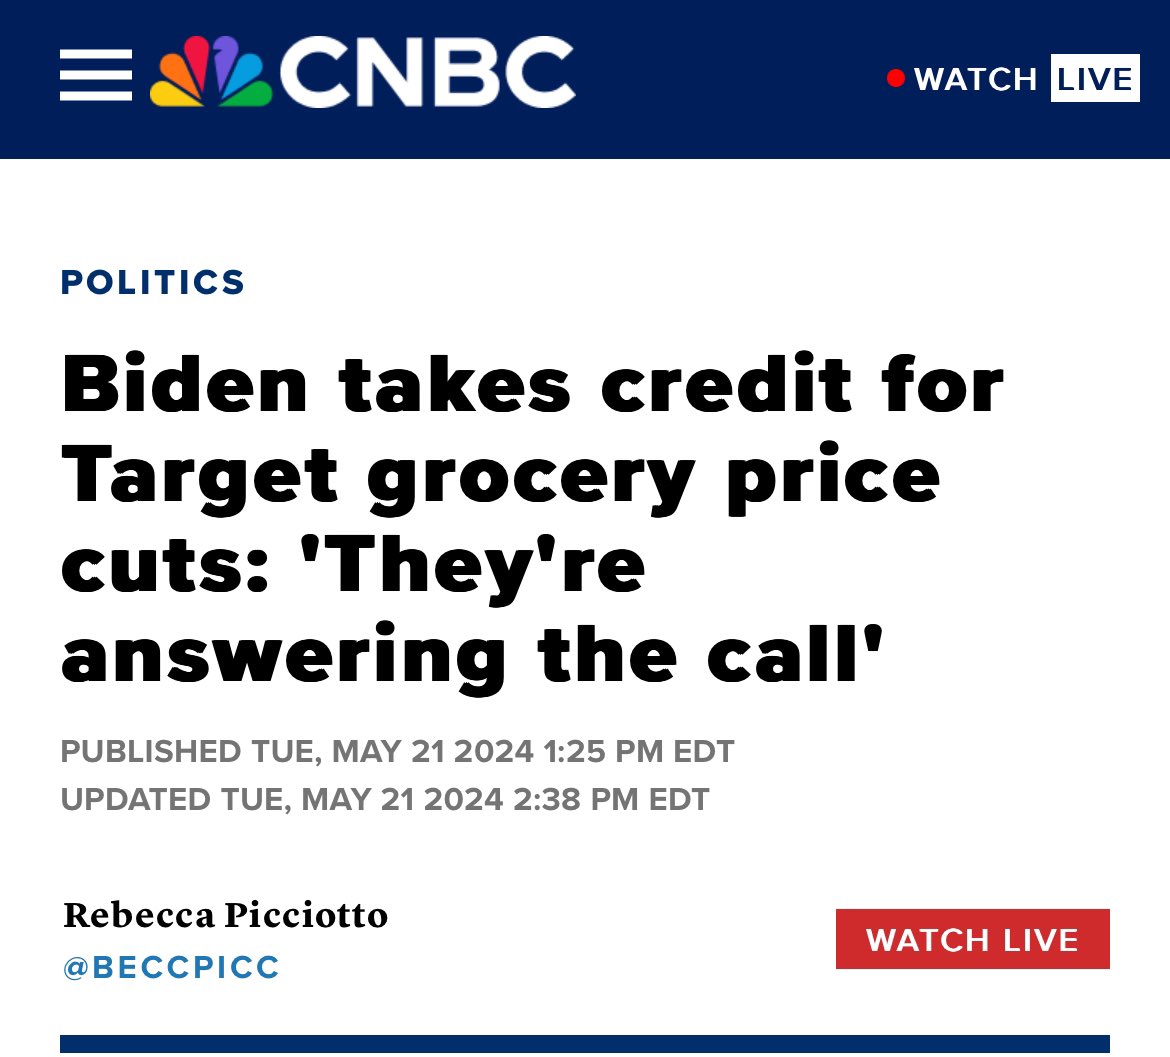 President Biden has been effective in calling on multi billion💵grocery corporations(that are making record profits)to cut prices for consumers. MAGA Republicans in congress have attacked him for it. #BidenFightsPriceGouging